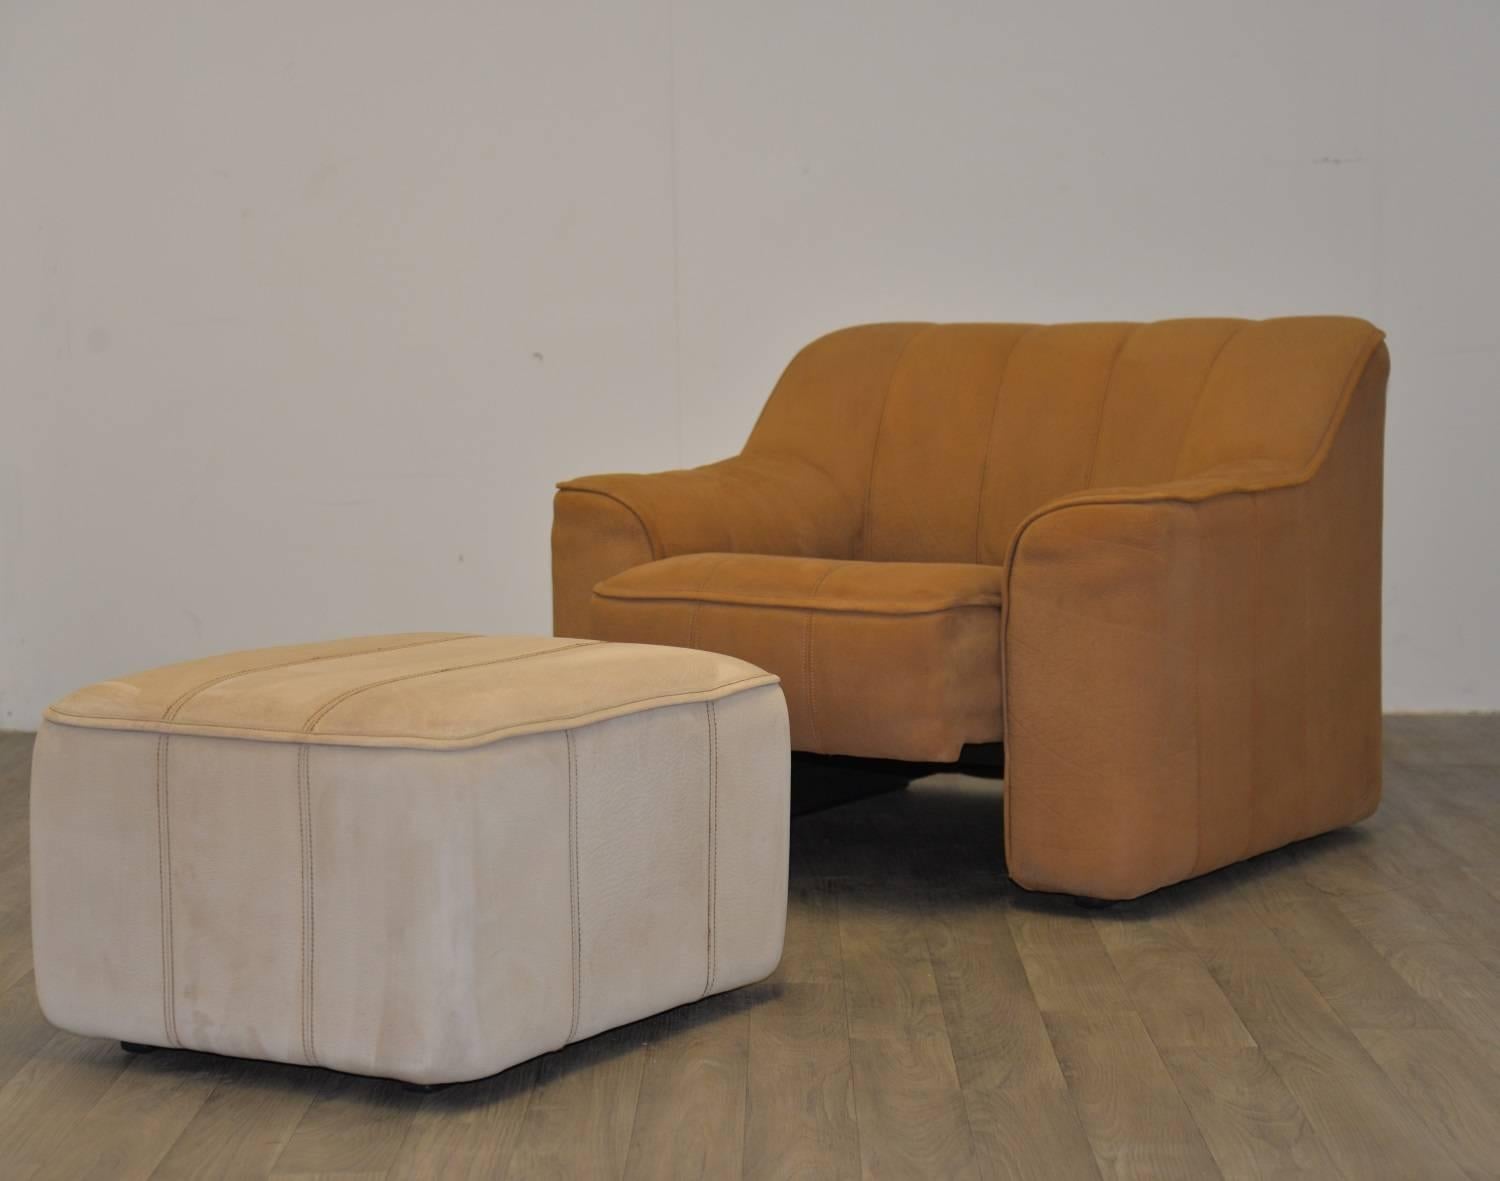 Discounted airfreight for our US and International customers (from 2 weeks door to door)

The Cambridge Chair Company brings to you a vintage 1970s De Sede DS 44 two-seat sofa and matching armchair with ottoman in thick buffalo leather with a soft